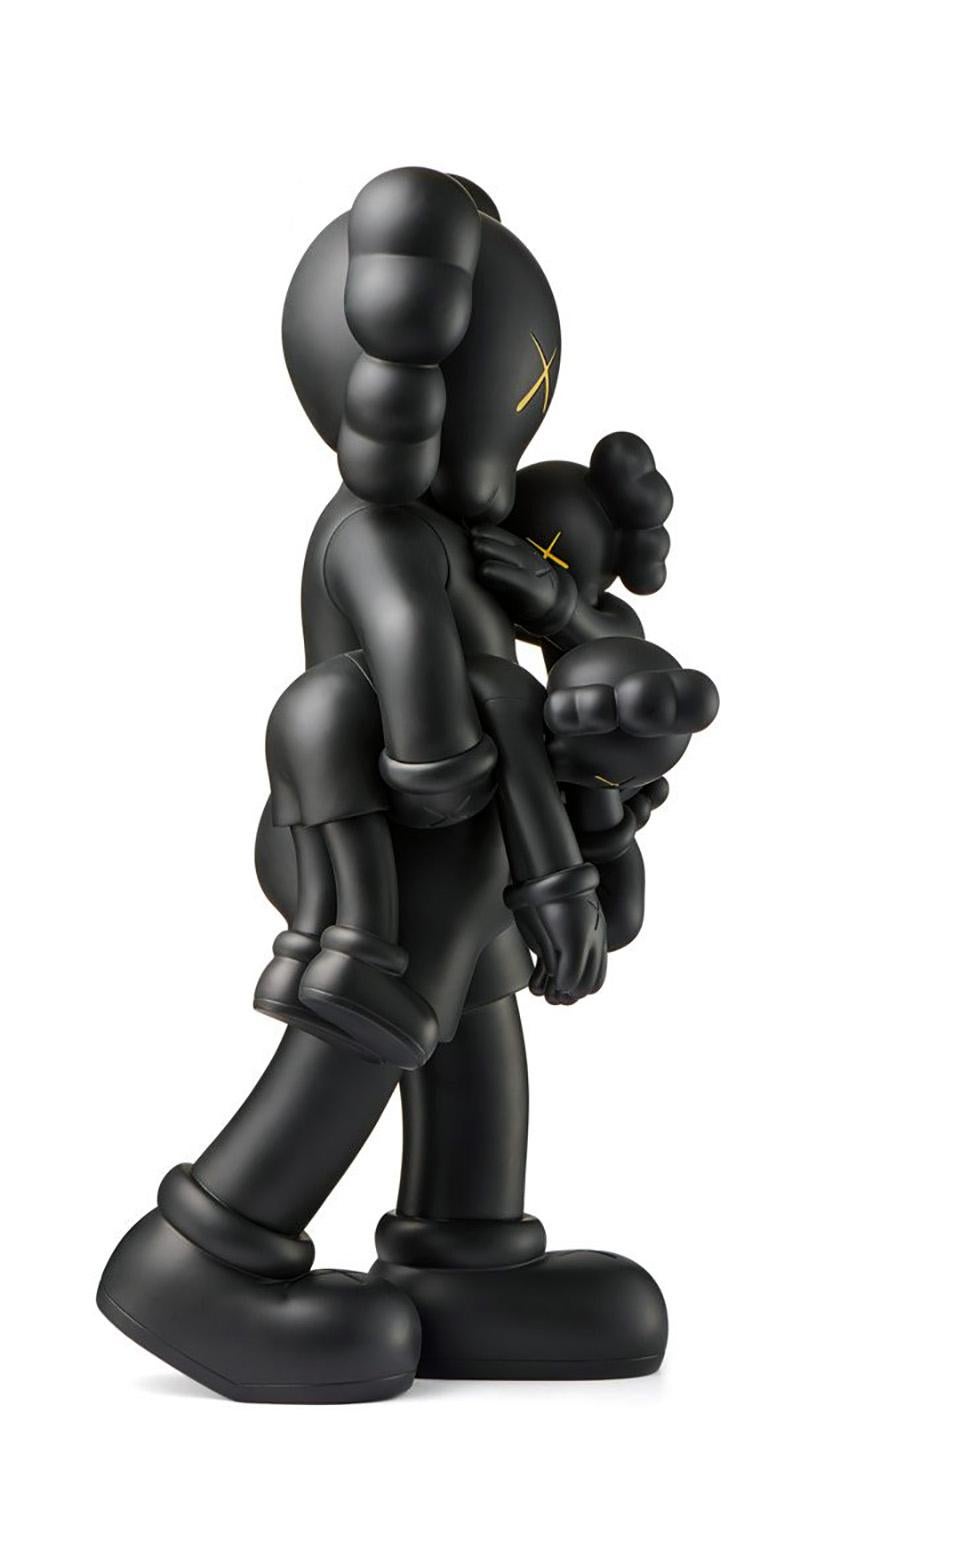 KAWS Clean Slate (Black), new & unopened in its original packaging. 
A well-received work and variation of Kaws' large scale Together sculpture held within the permanent collection of the Modern Art Museum of Fort Worth.

Medium: Vinyl & Cast Resin